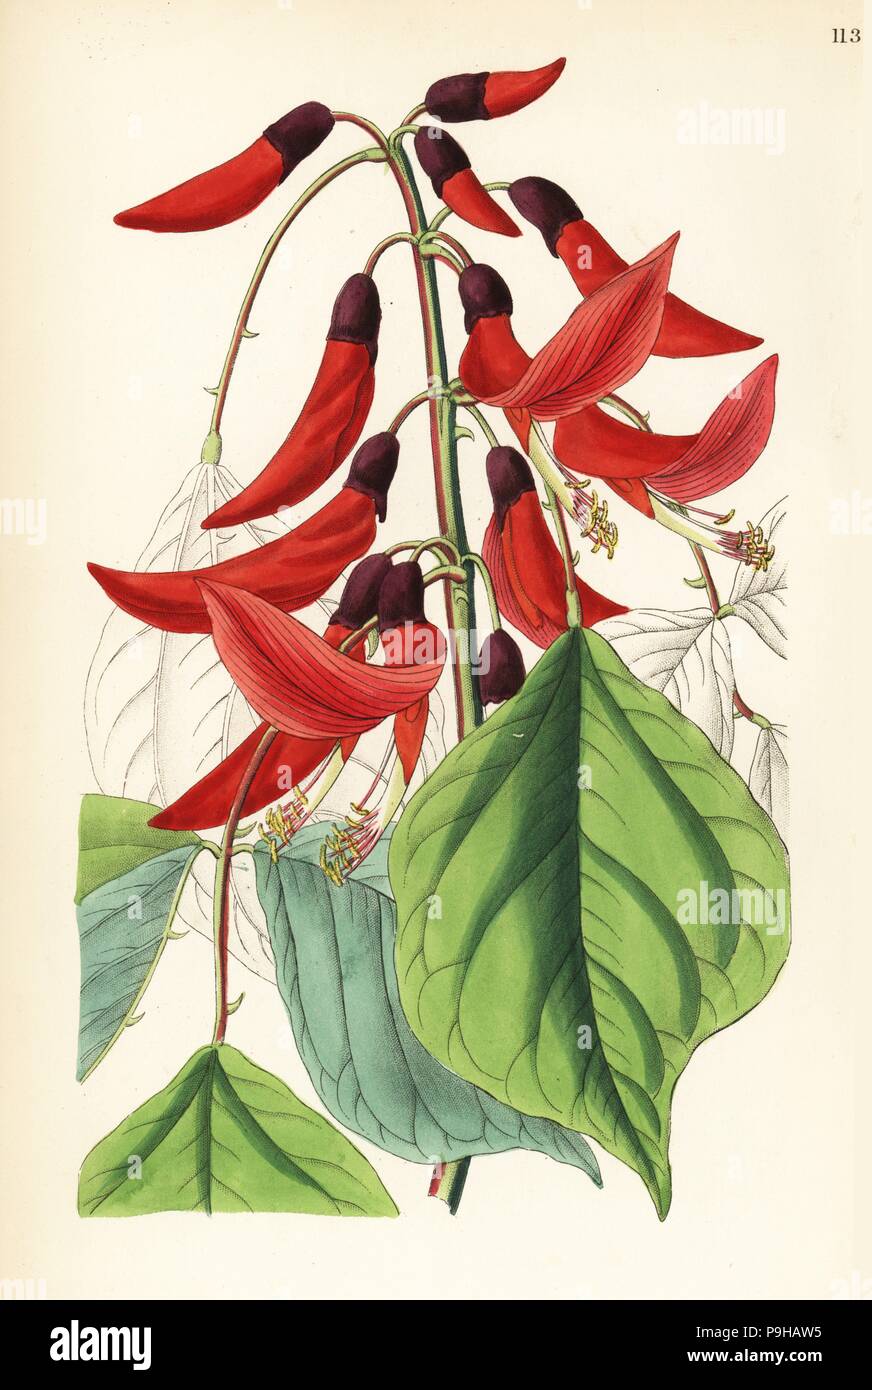 Mr. Bidwill's erythrina, Erythrina bidwillii. Flame tree or coral tree. Hybrid of Erythrina herbacea x Erythrina crista-galli. Handcoloured copperplate engraving from John Lindley and Robert Sweet's Ornamental Flower Garden and Shrubbery, G. Willis, London, 1854. Stock Photo